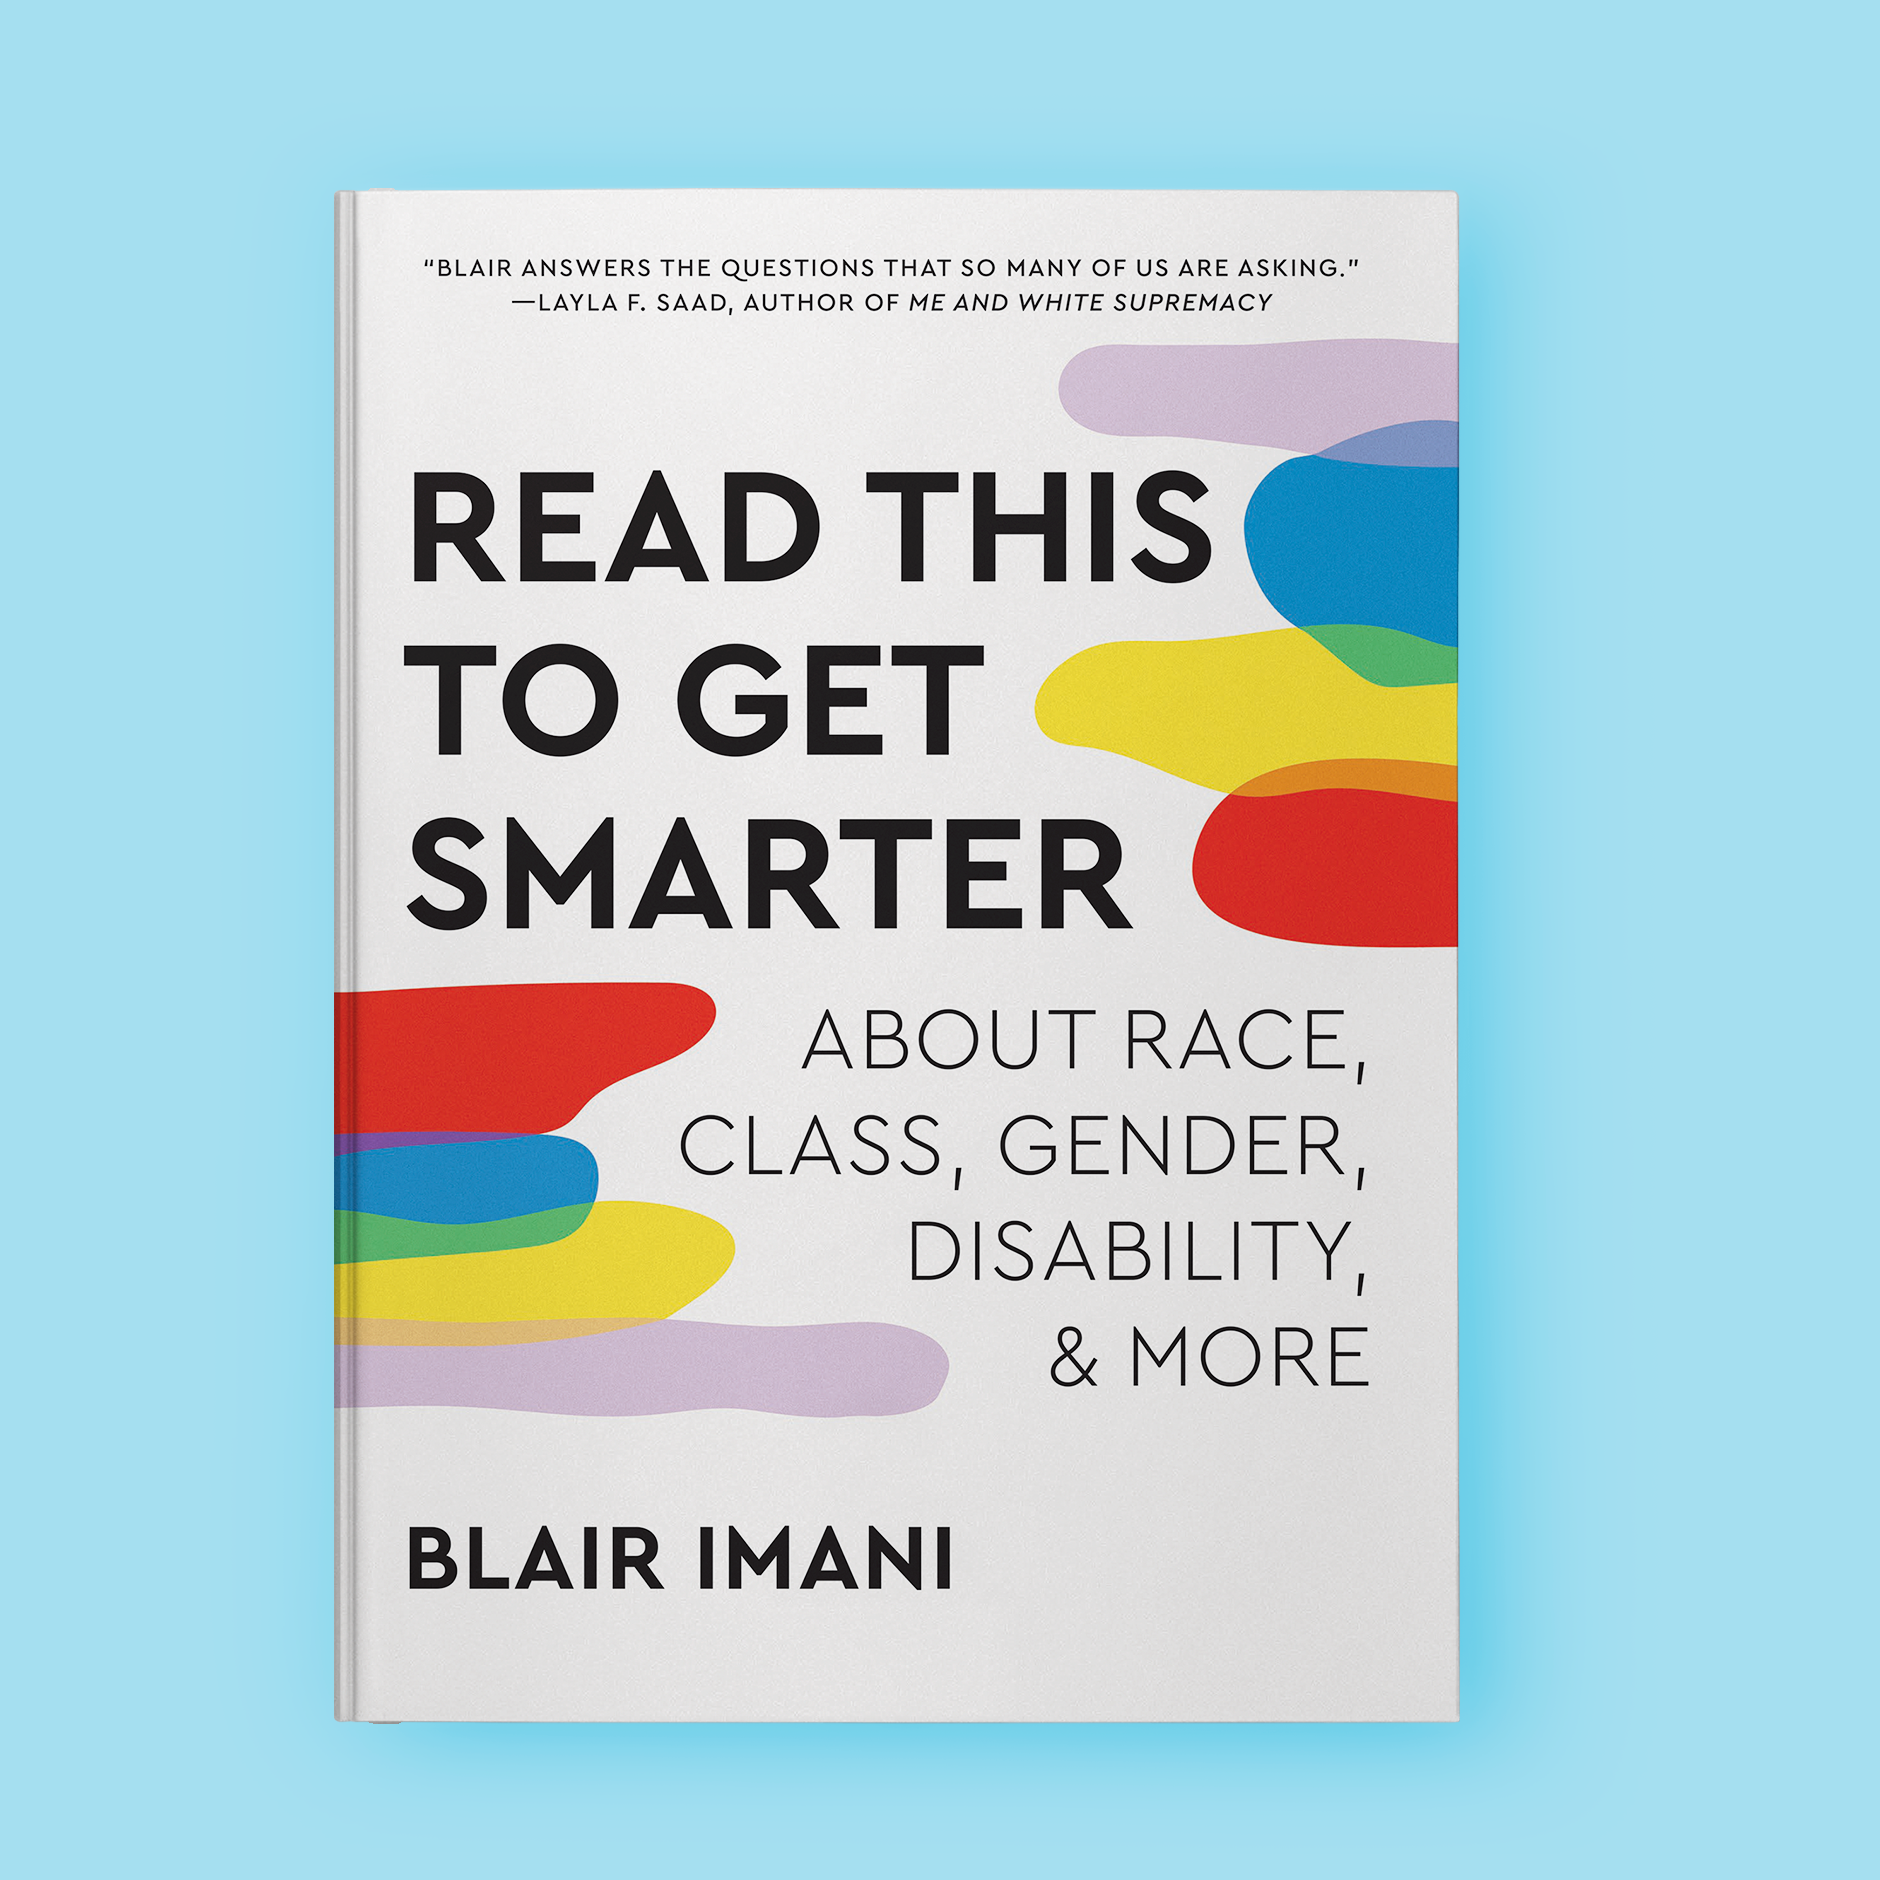 EXCLUSIVE: Blair Imani Reveals Cover Art For Her New Book, ‘Read This To Get Smarter’